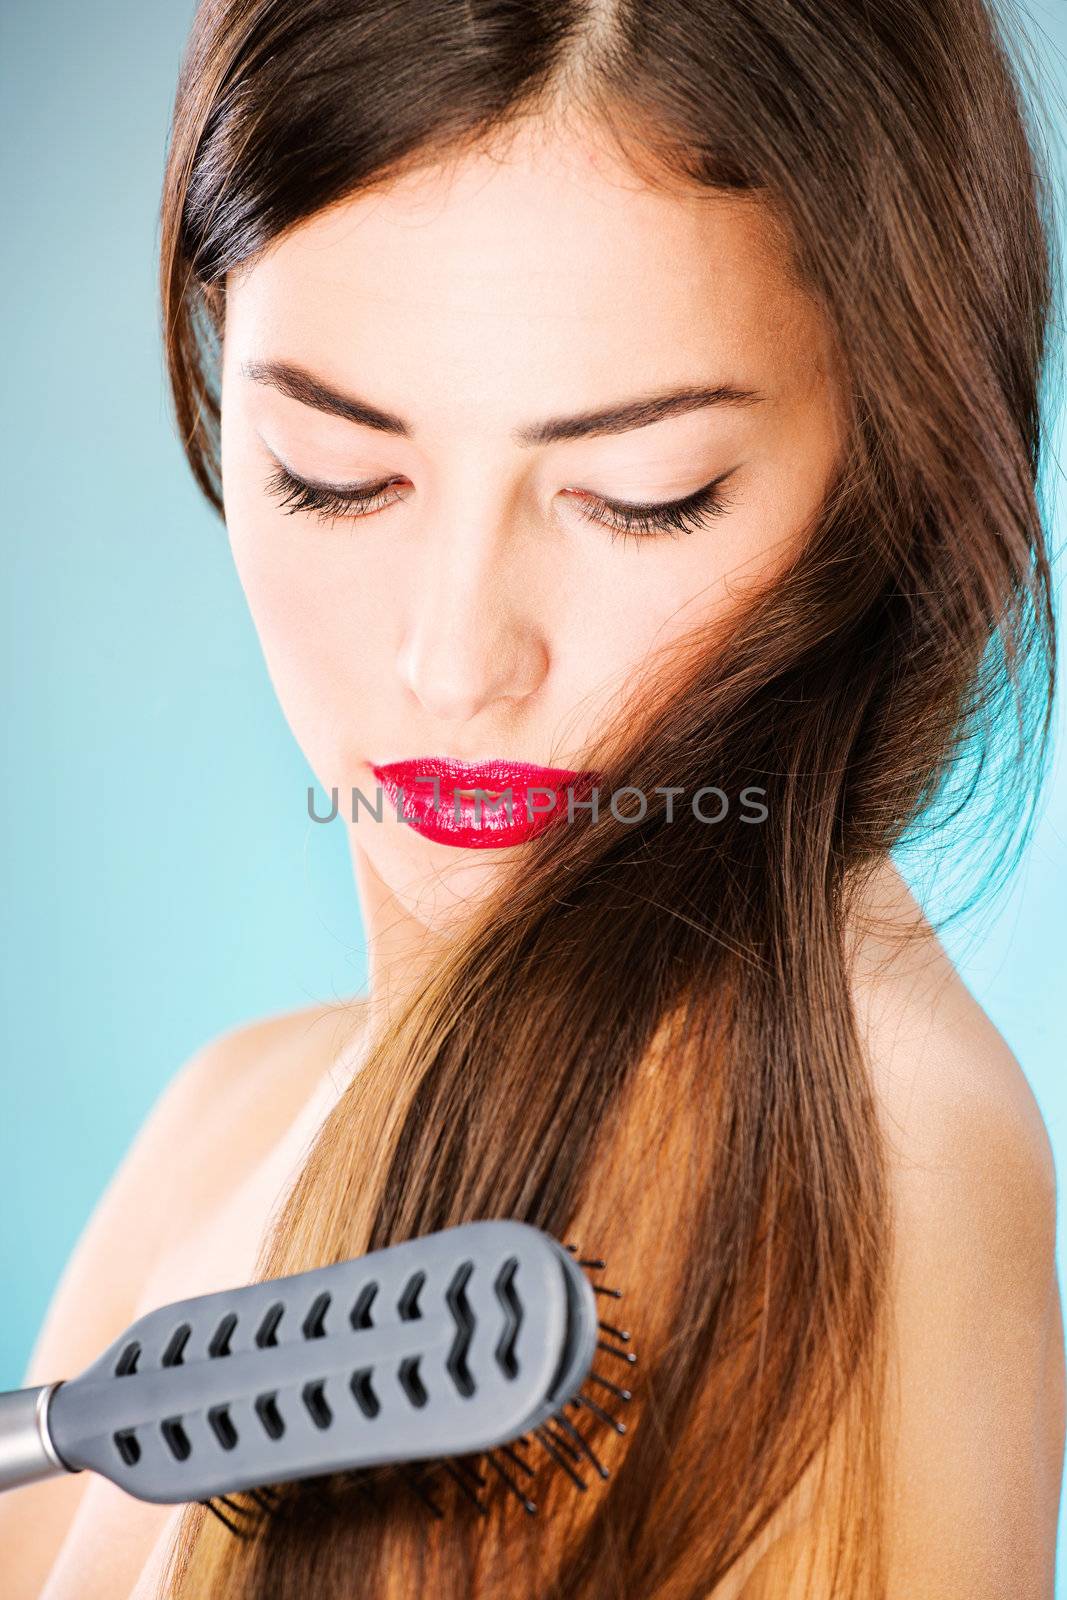 woman with long hair holding comb by imarin